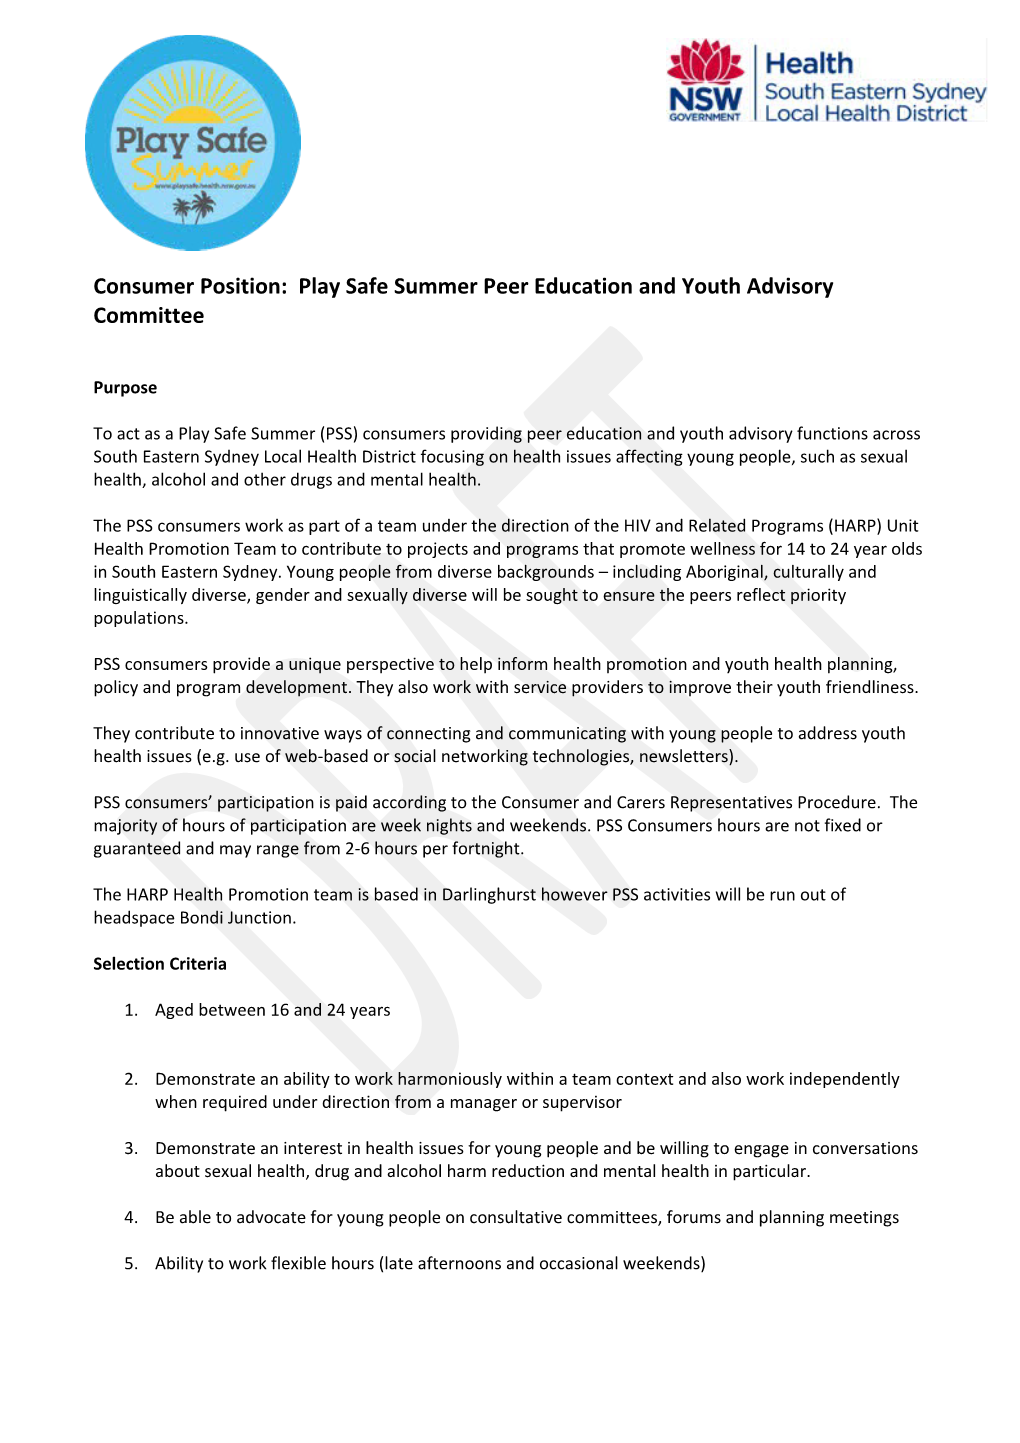 Consumer Position: Play Safe Summer Peer Education and Youth Advisory Committee